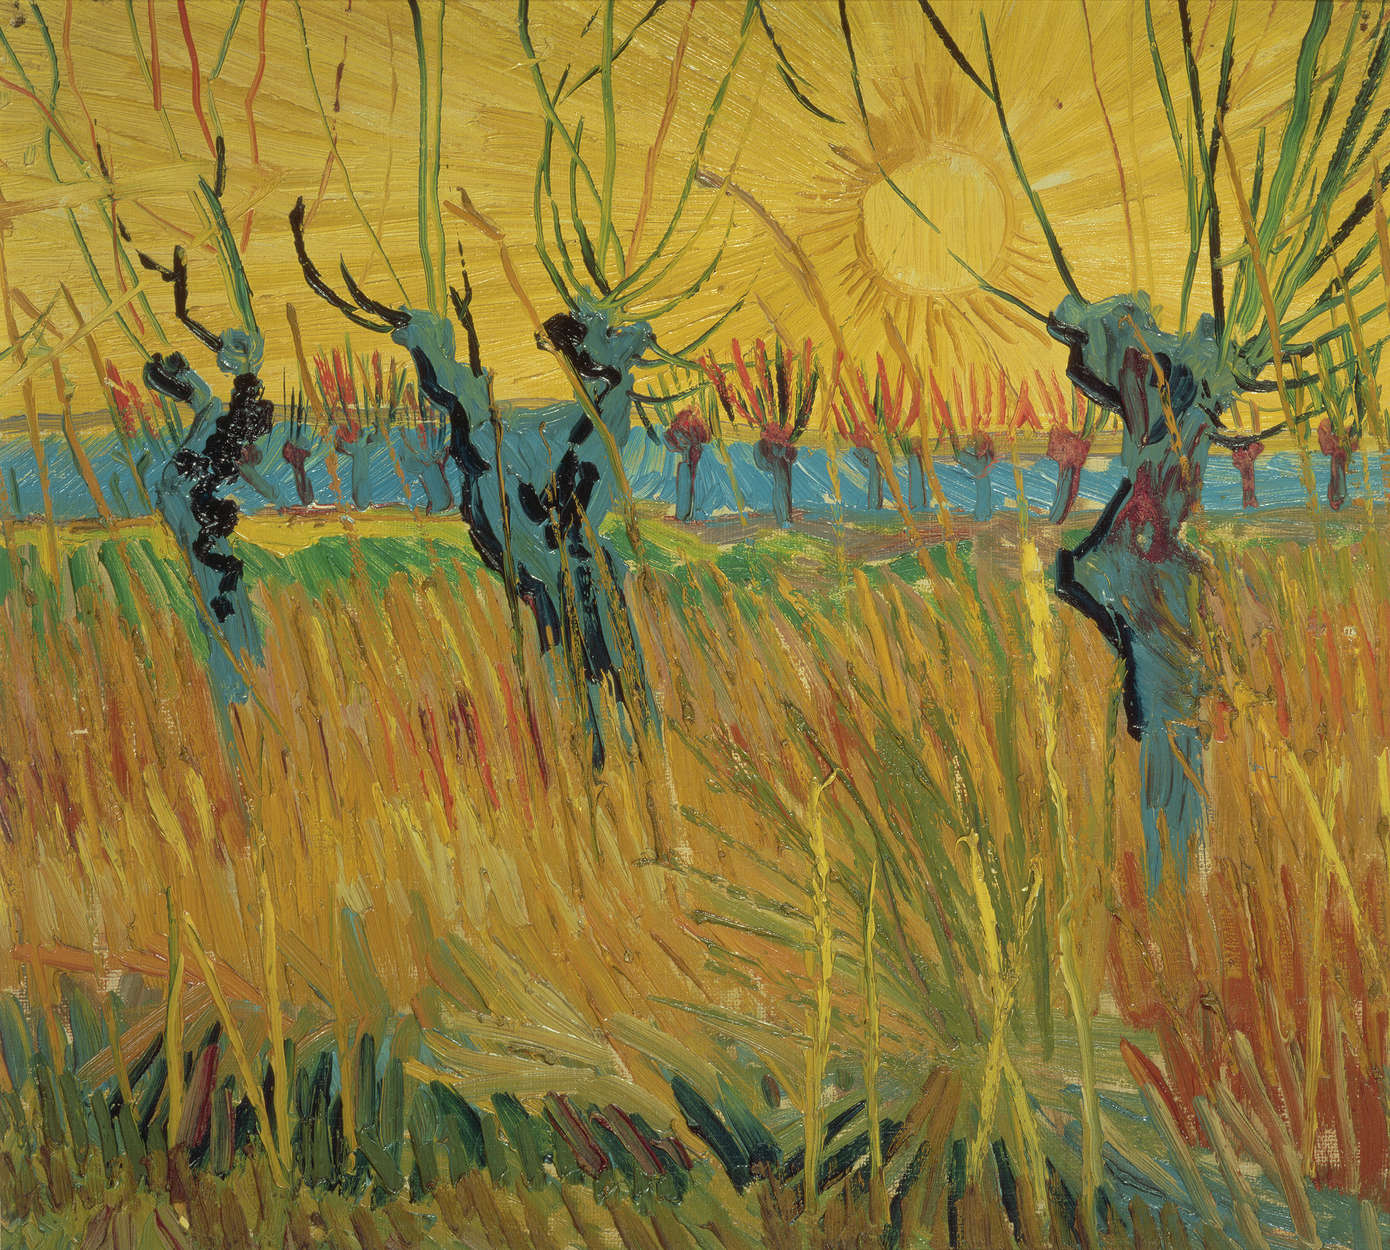             Photo wallpaper "Willows at sunset" by Vincent van Gogh
        